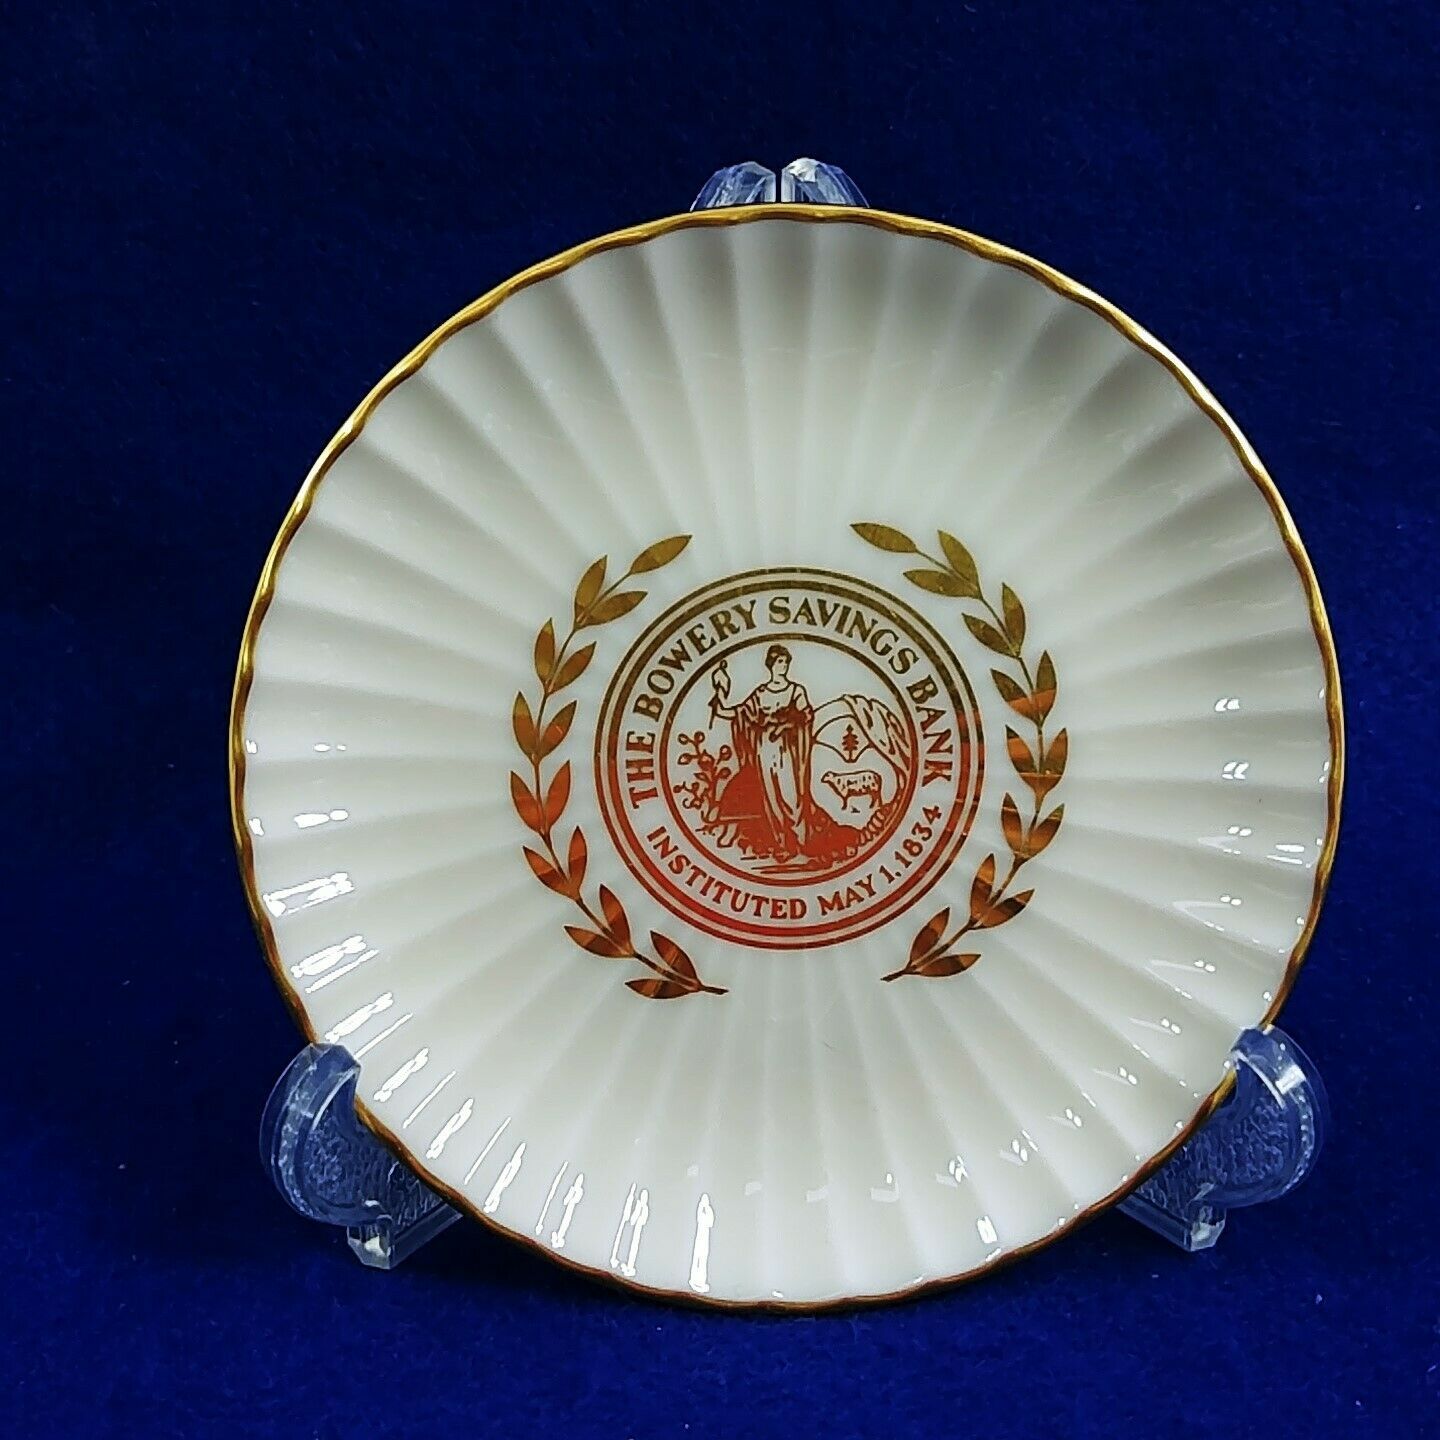 Primary image for Commemorative Plate Bowery Savings Bank 1963 Custom Made by Lenox 4.25"